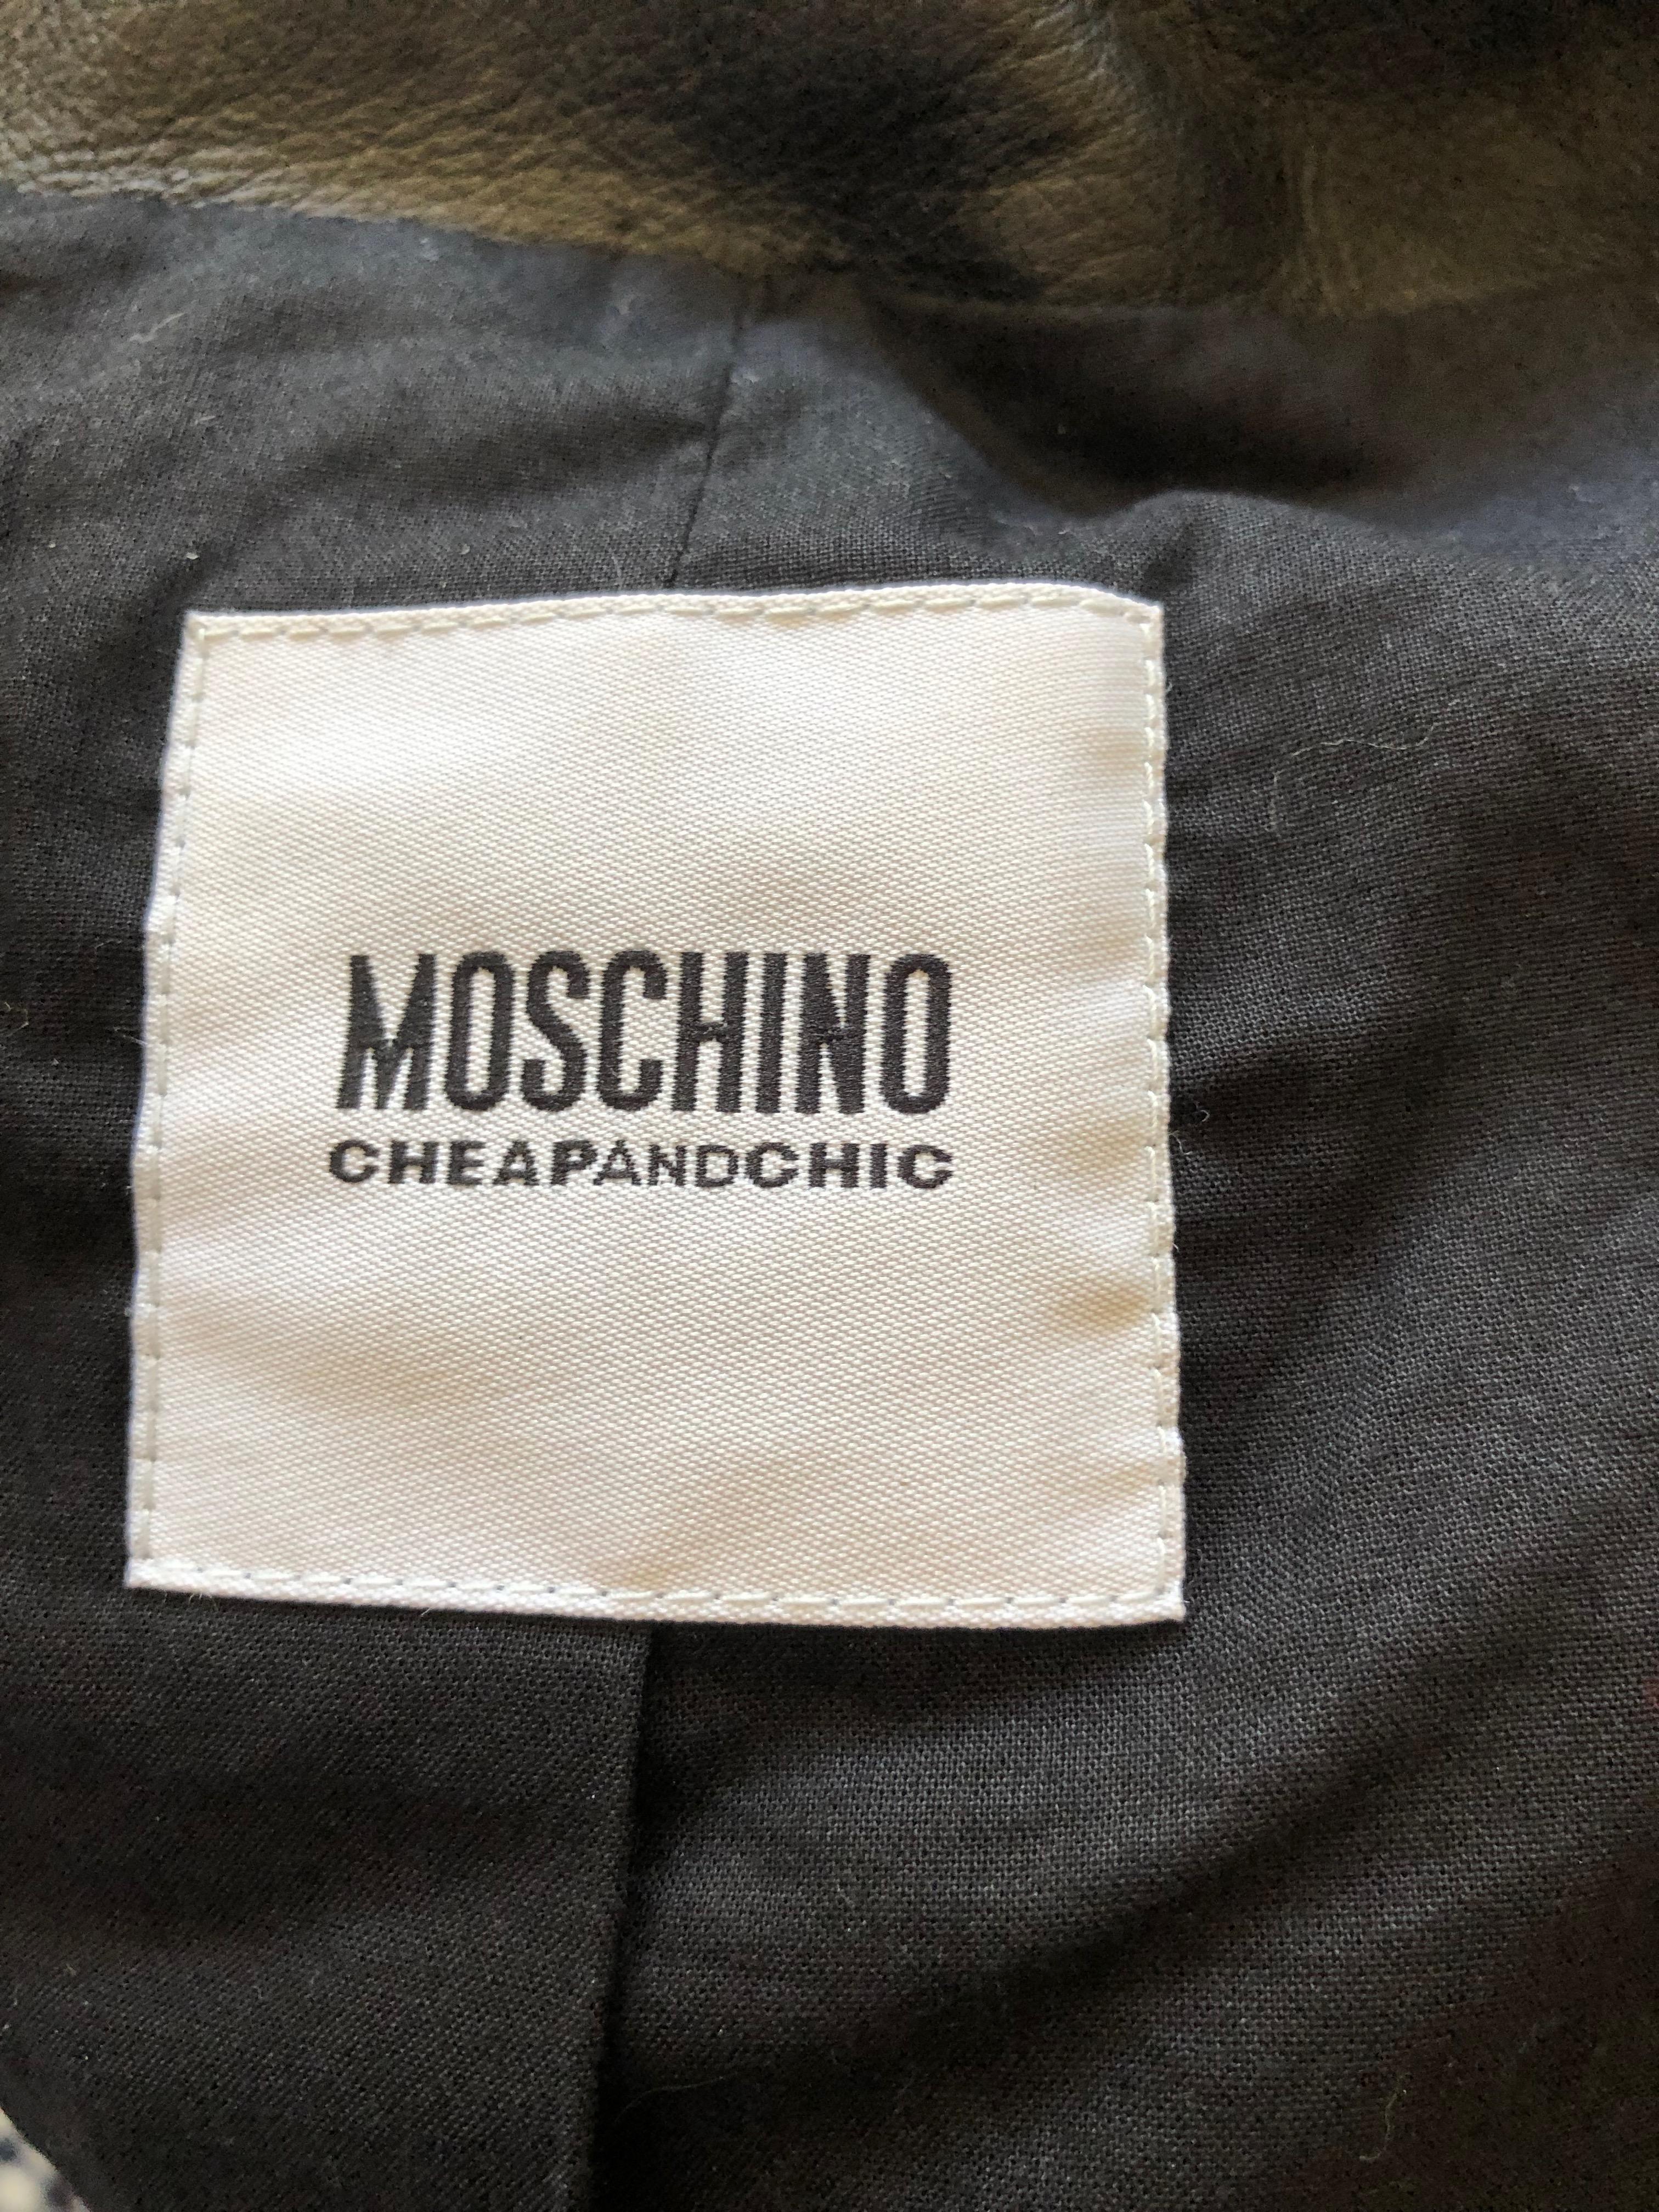 Moschino Cheap & Chic Vintage Cropped Black Lambskin Jacket with Gold Chain  For Sale 6